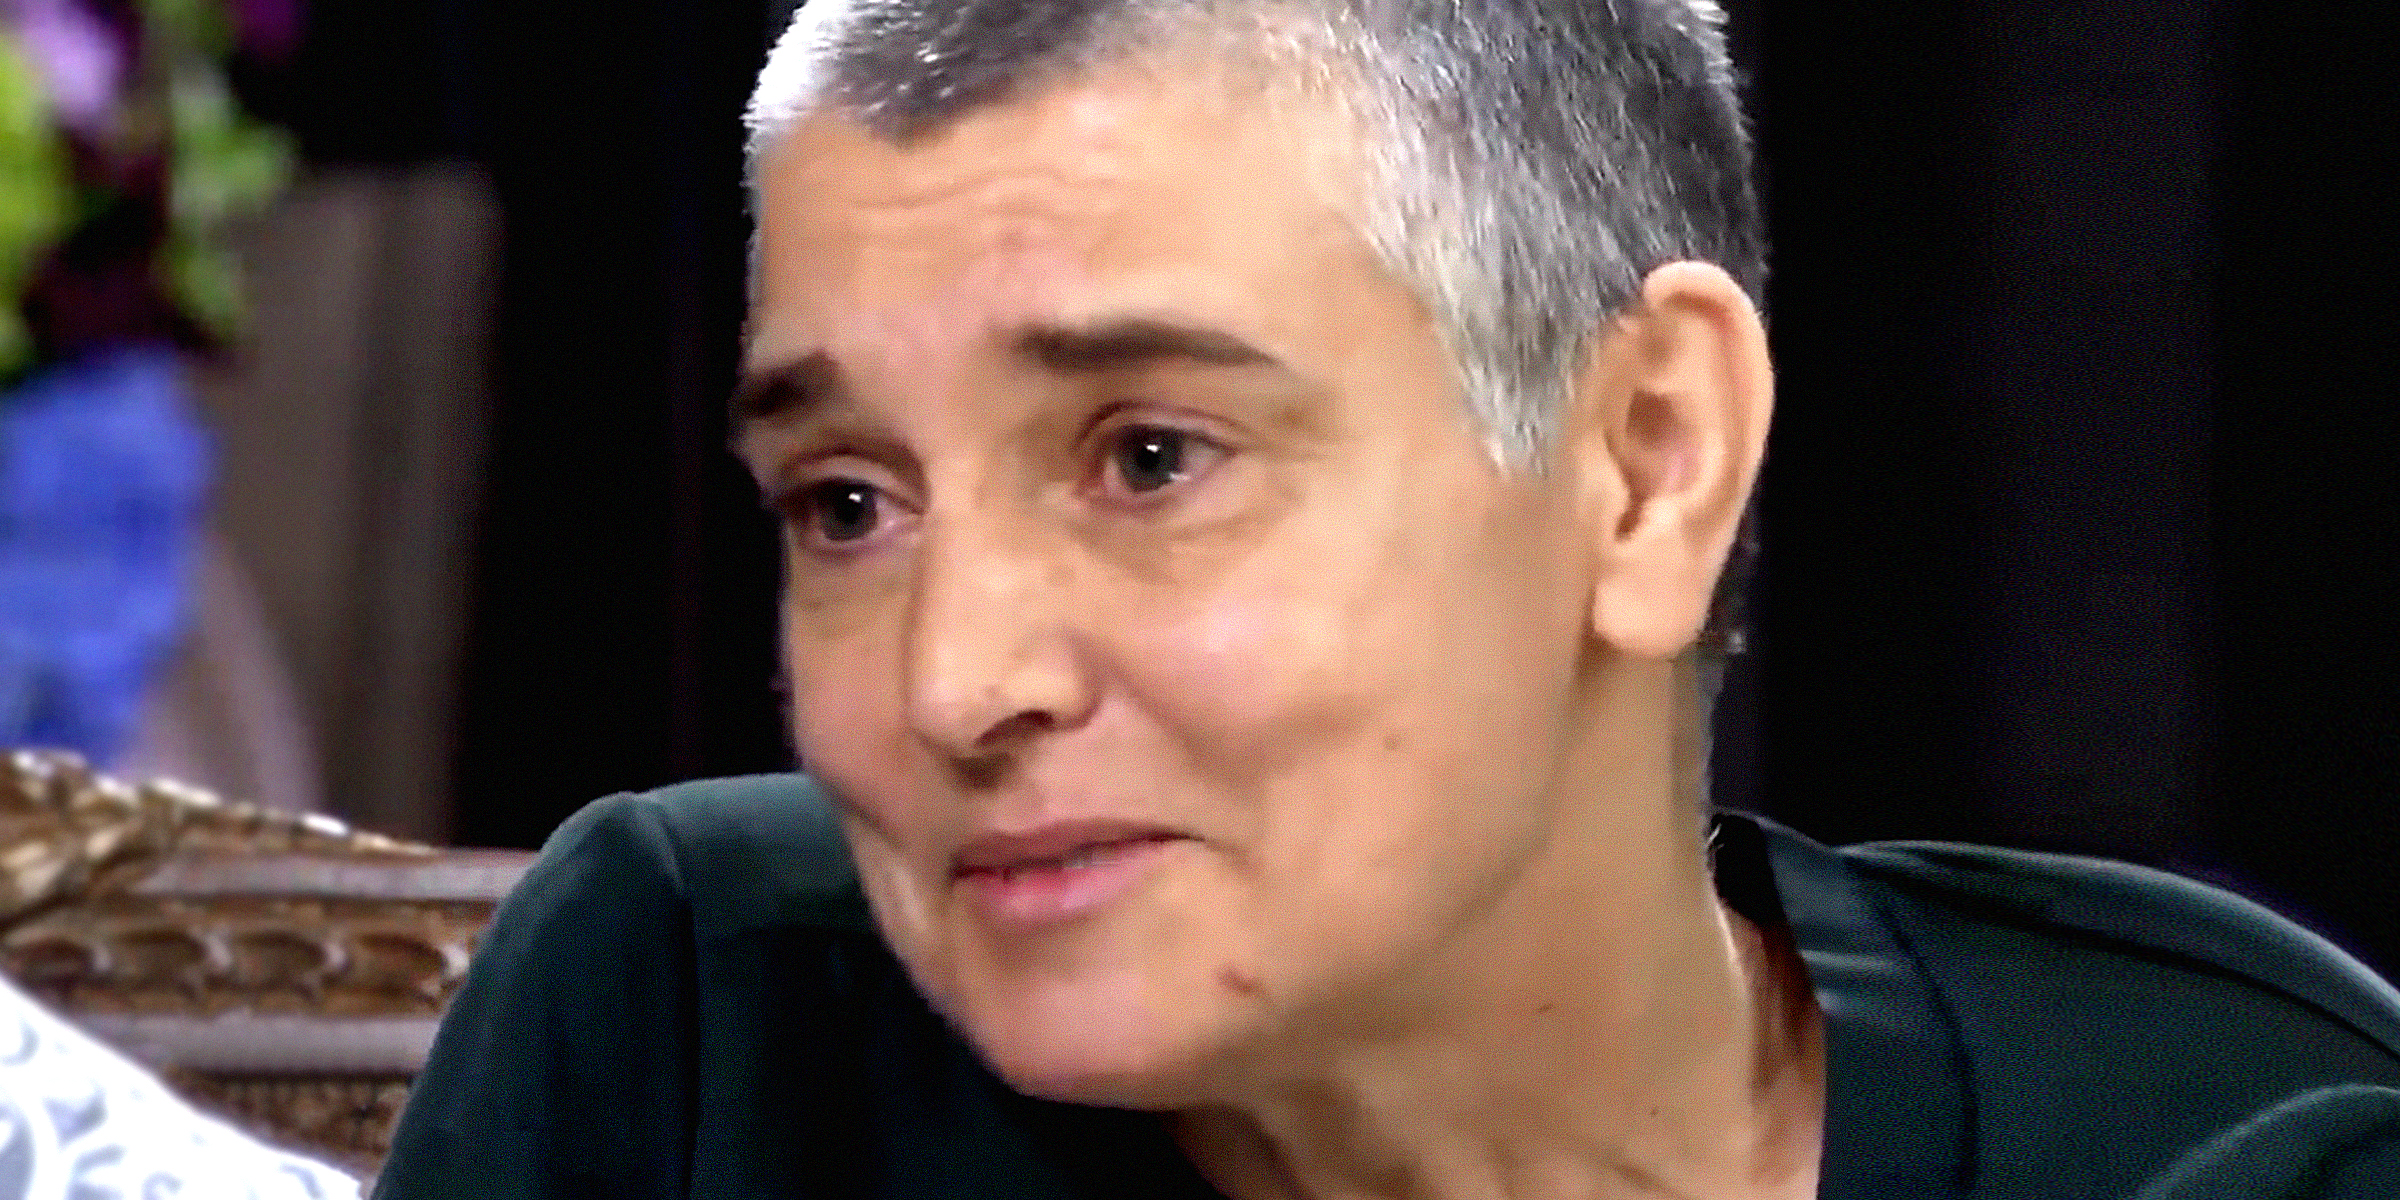 Sinéad O'Connor | Source: YouTube.com/Dr. Phil